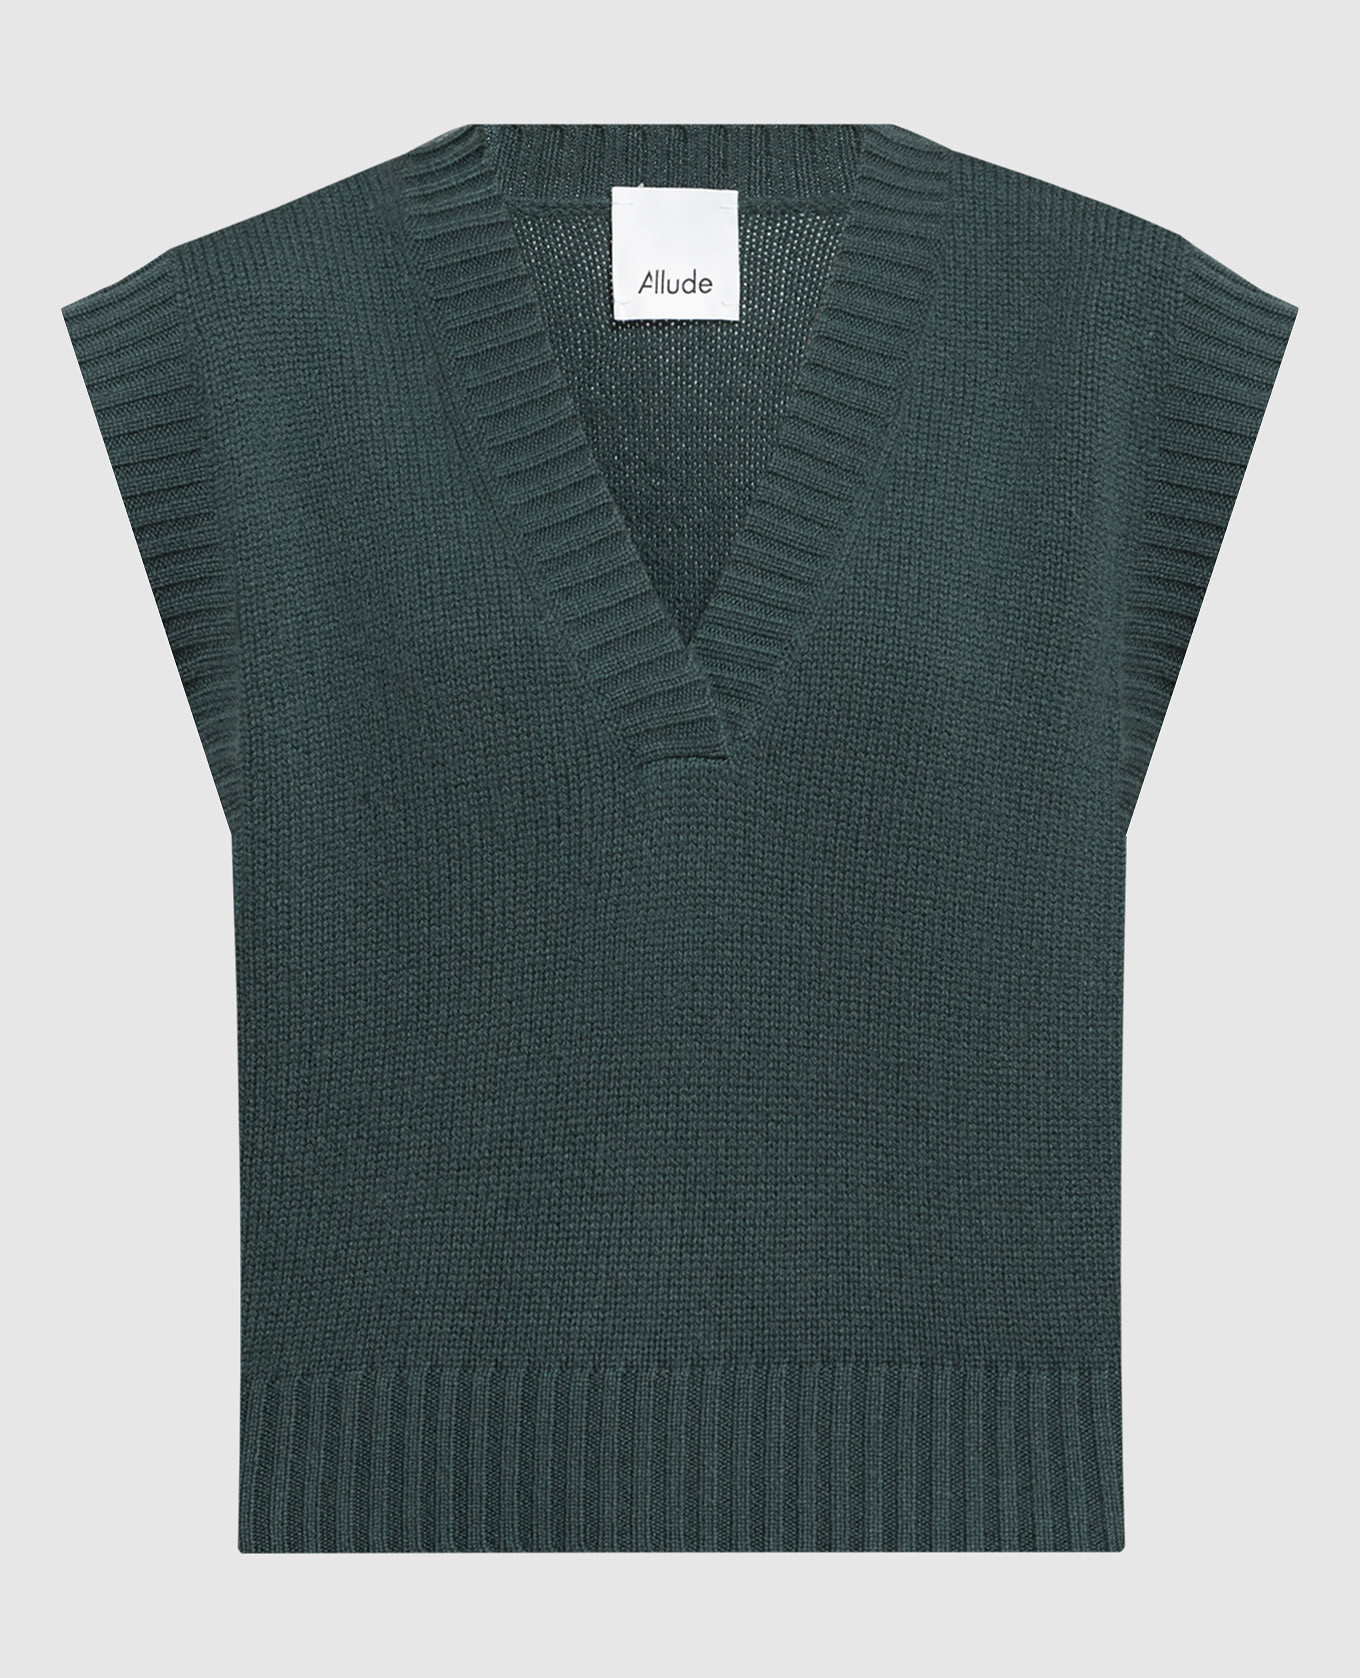 Green vest made of cashmere